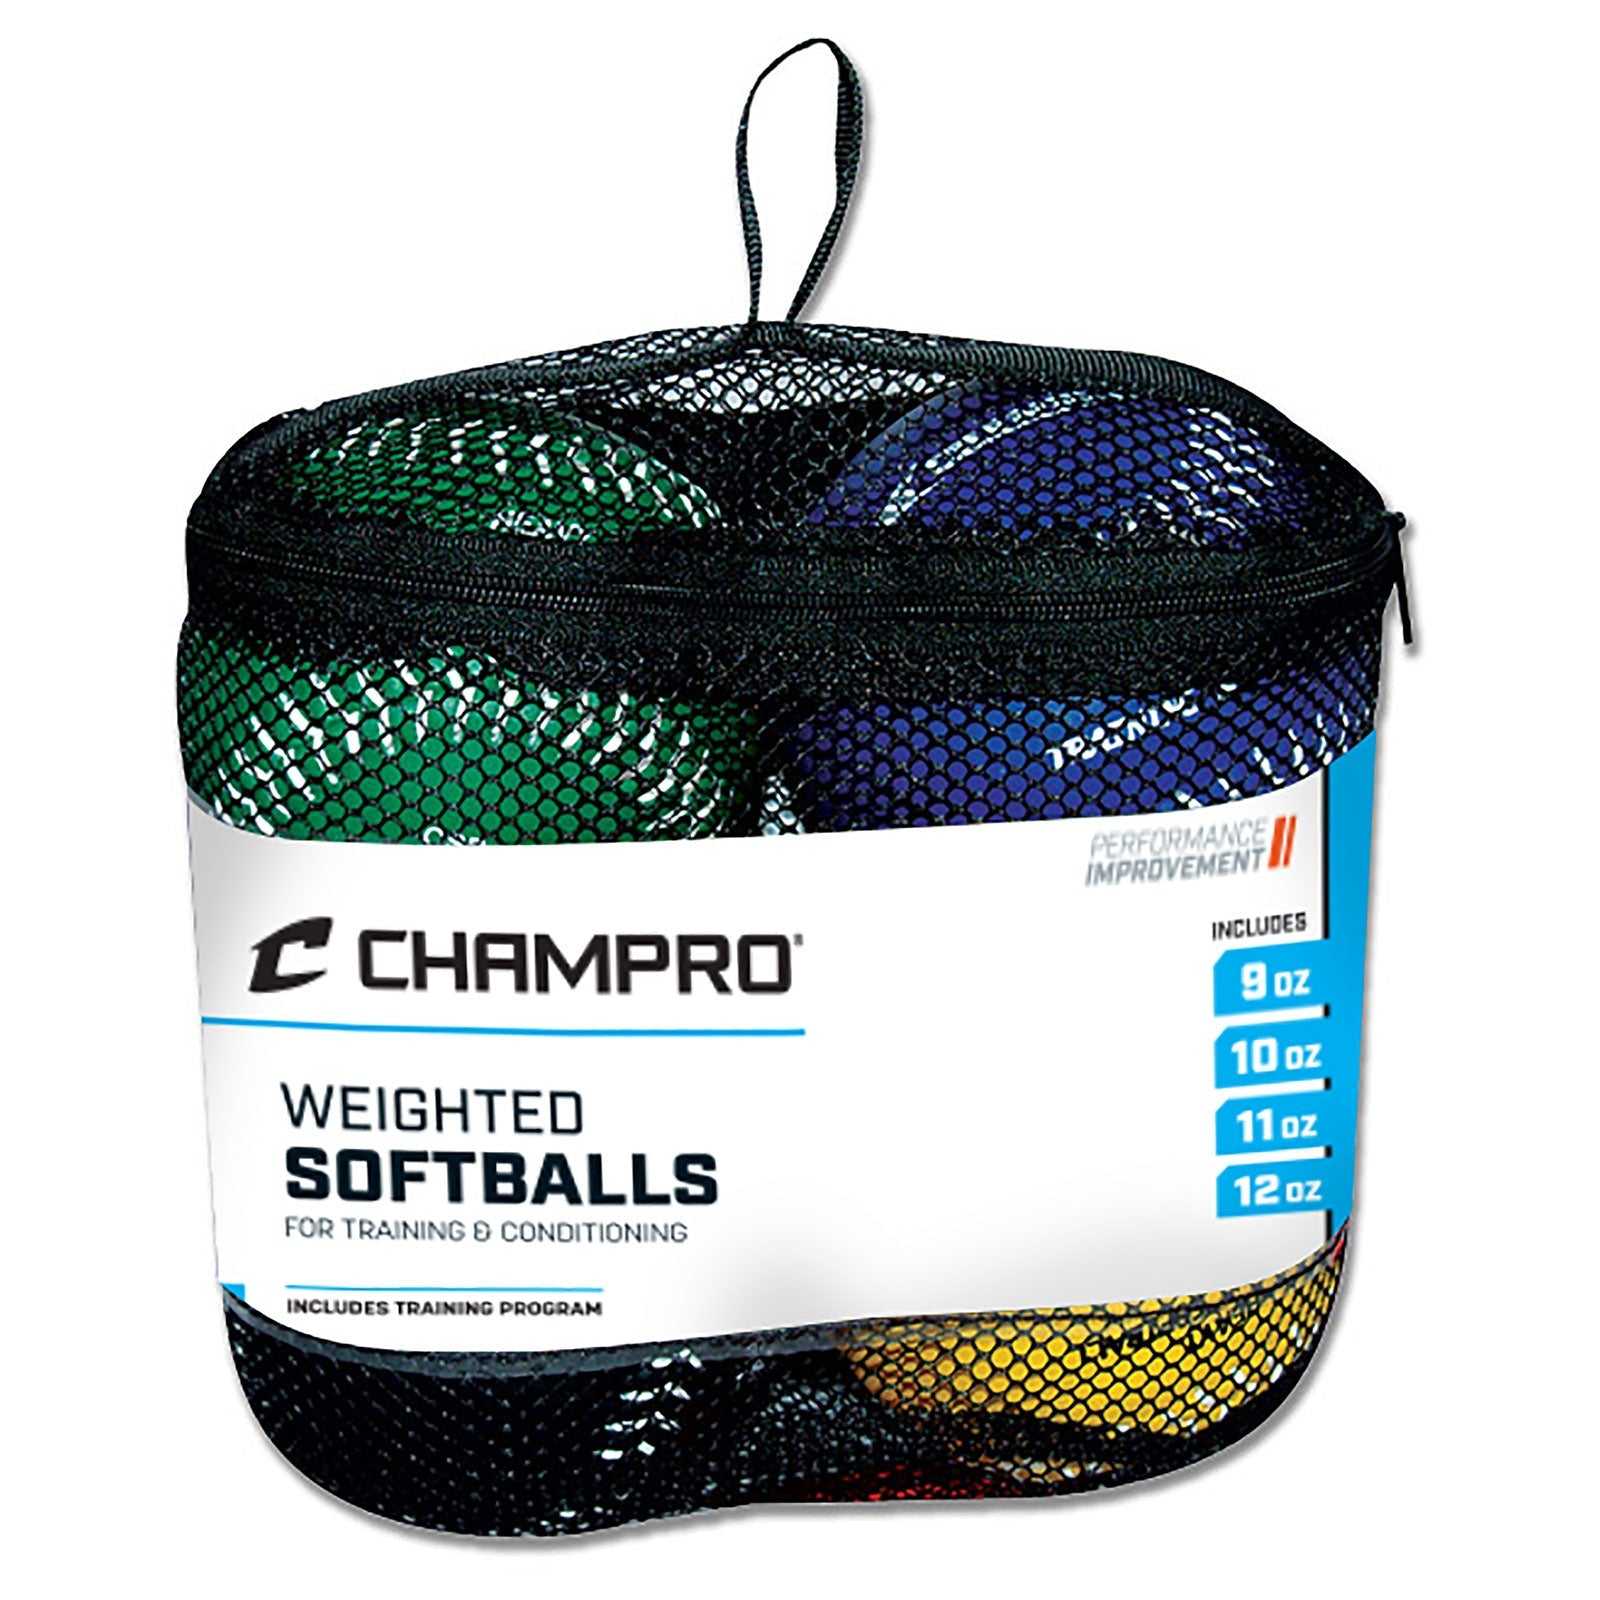 Champro CSB7S Weighted Training Softball Set (Incudes 9oz, 10oz, 11oz, 12oz) - HIT a Double